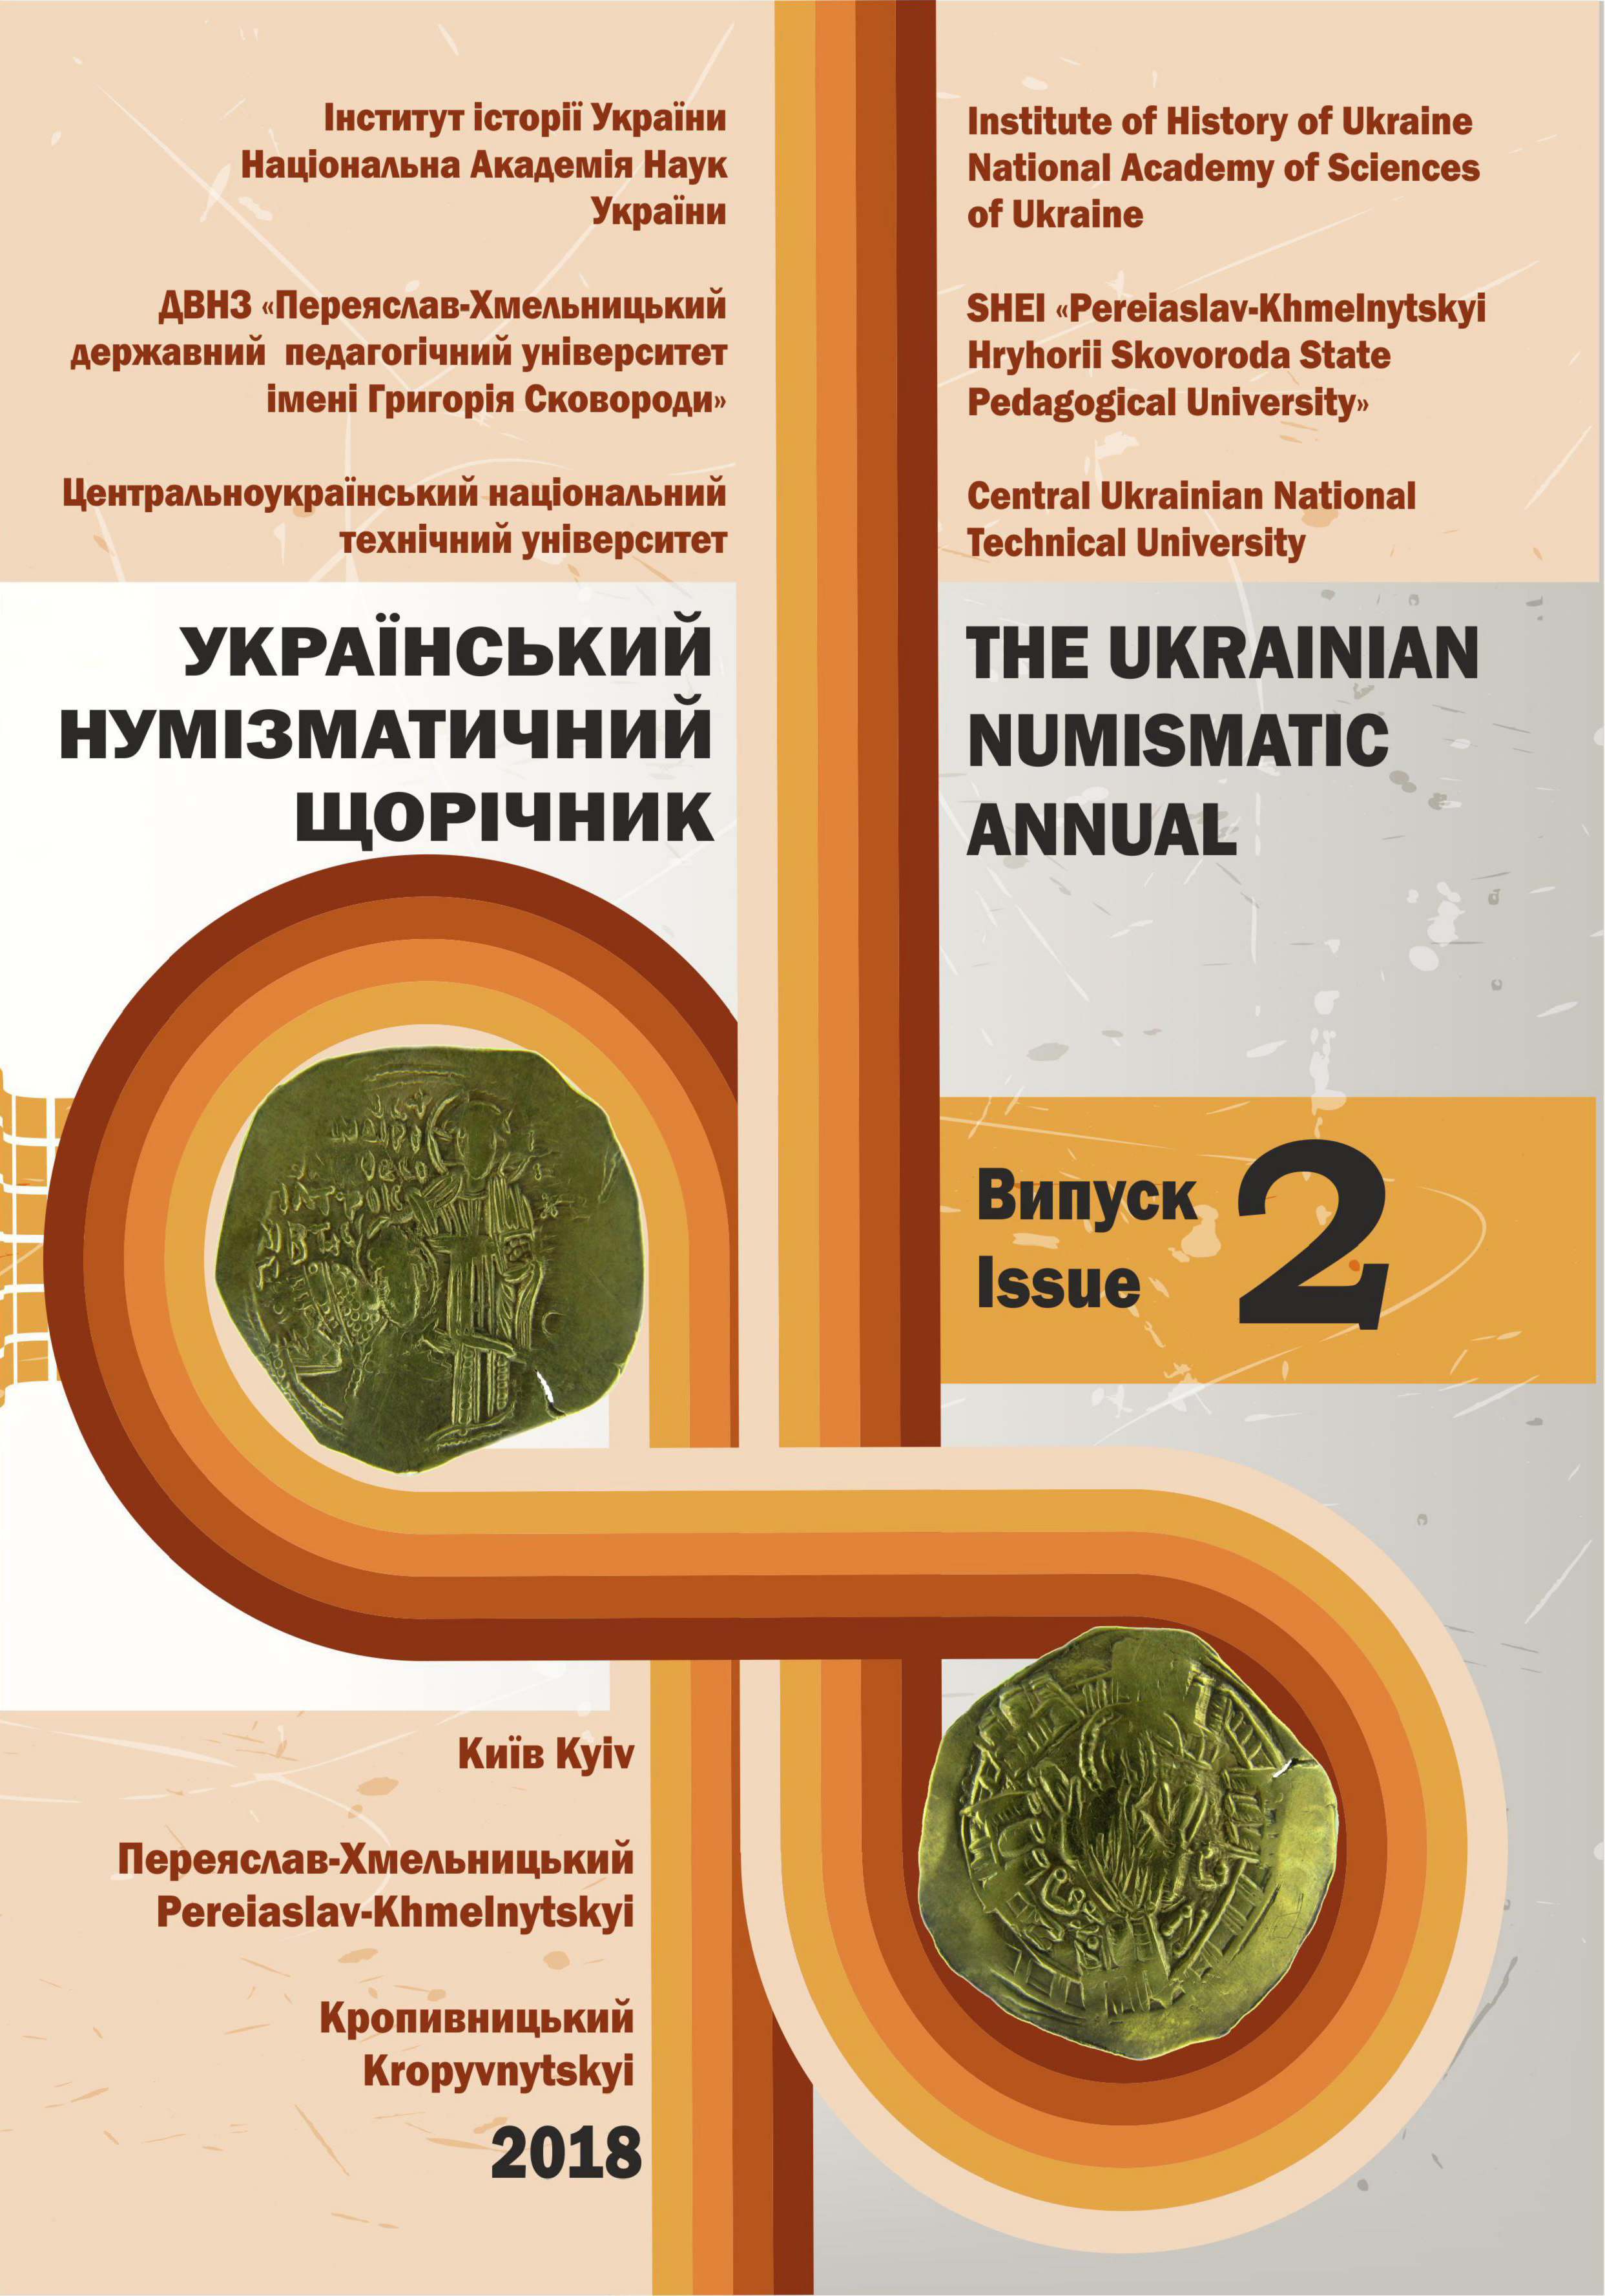 THE CHRONOLOGY OF THE FINDS OF THE SREBRENIKS OF VLADIMIR’S SVYATOSLAVICH TYPE IV Cover Image